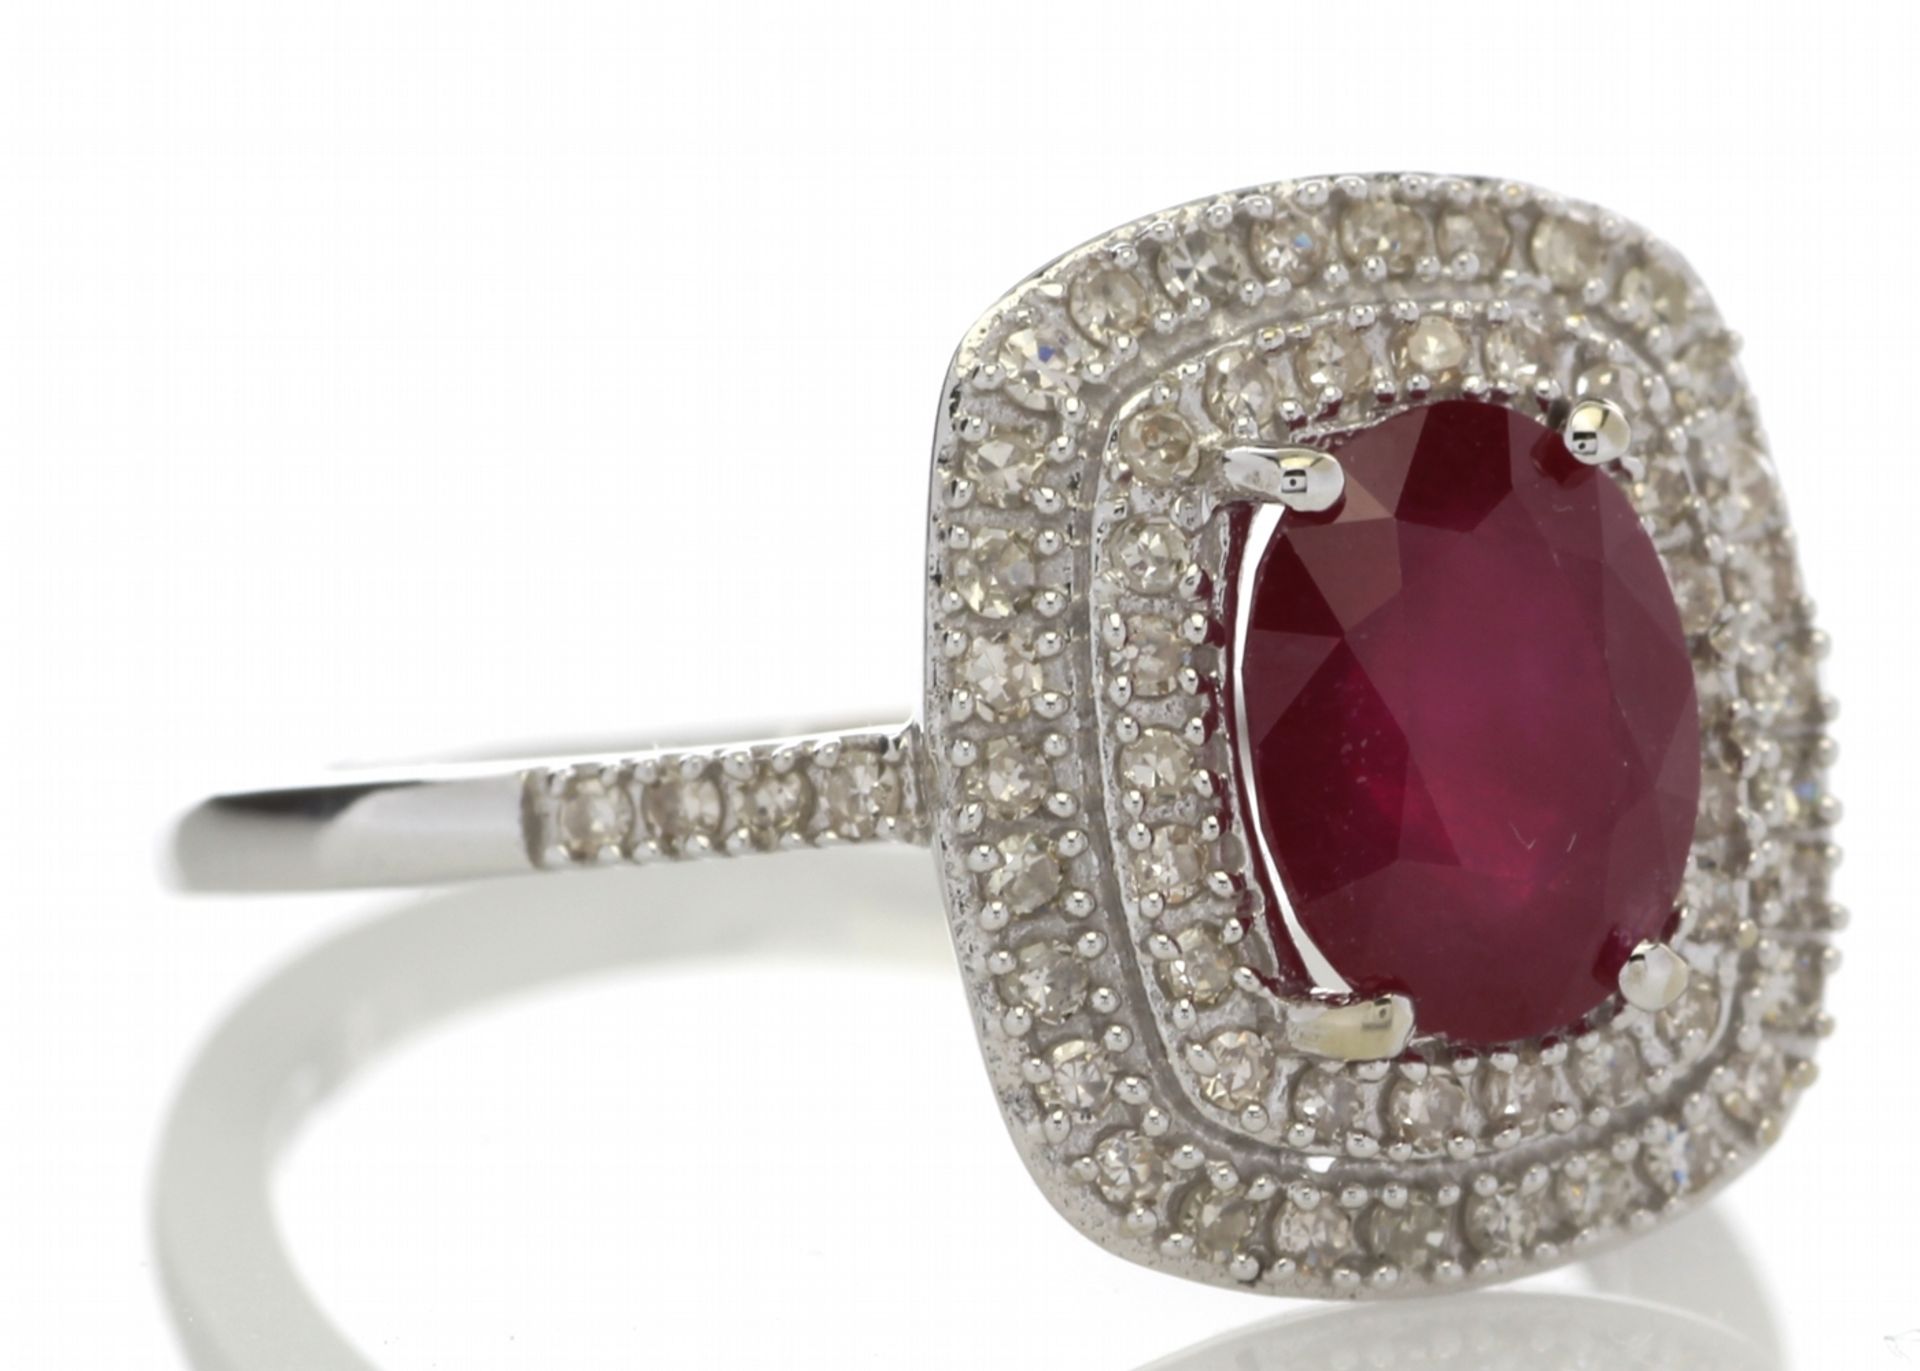 9ct White Gold Oval Ruby And Diamond Cluster Diamond Ring 0.33 Carats - Valued By GIE £3,470.00 - - Image 4 of 5